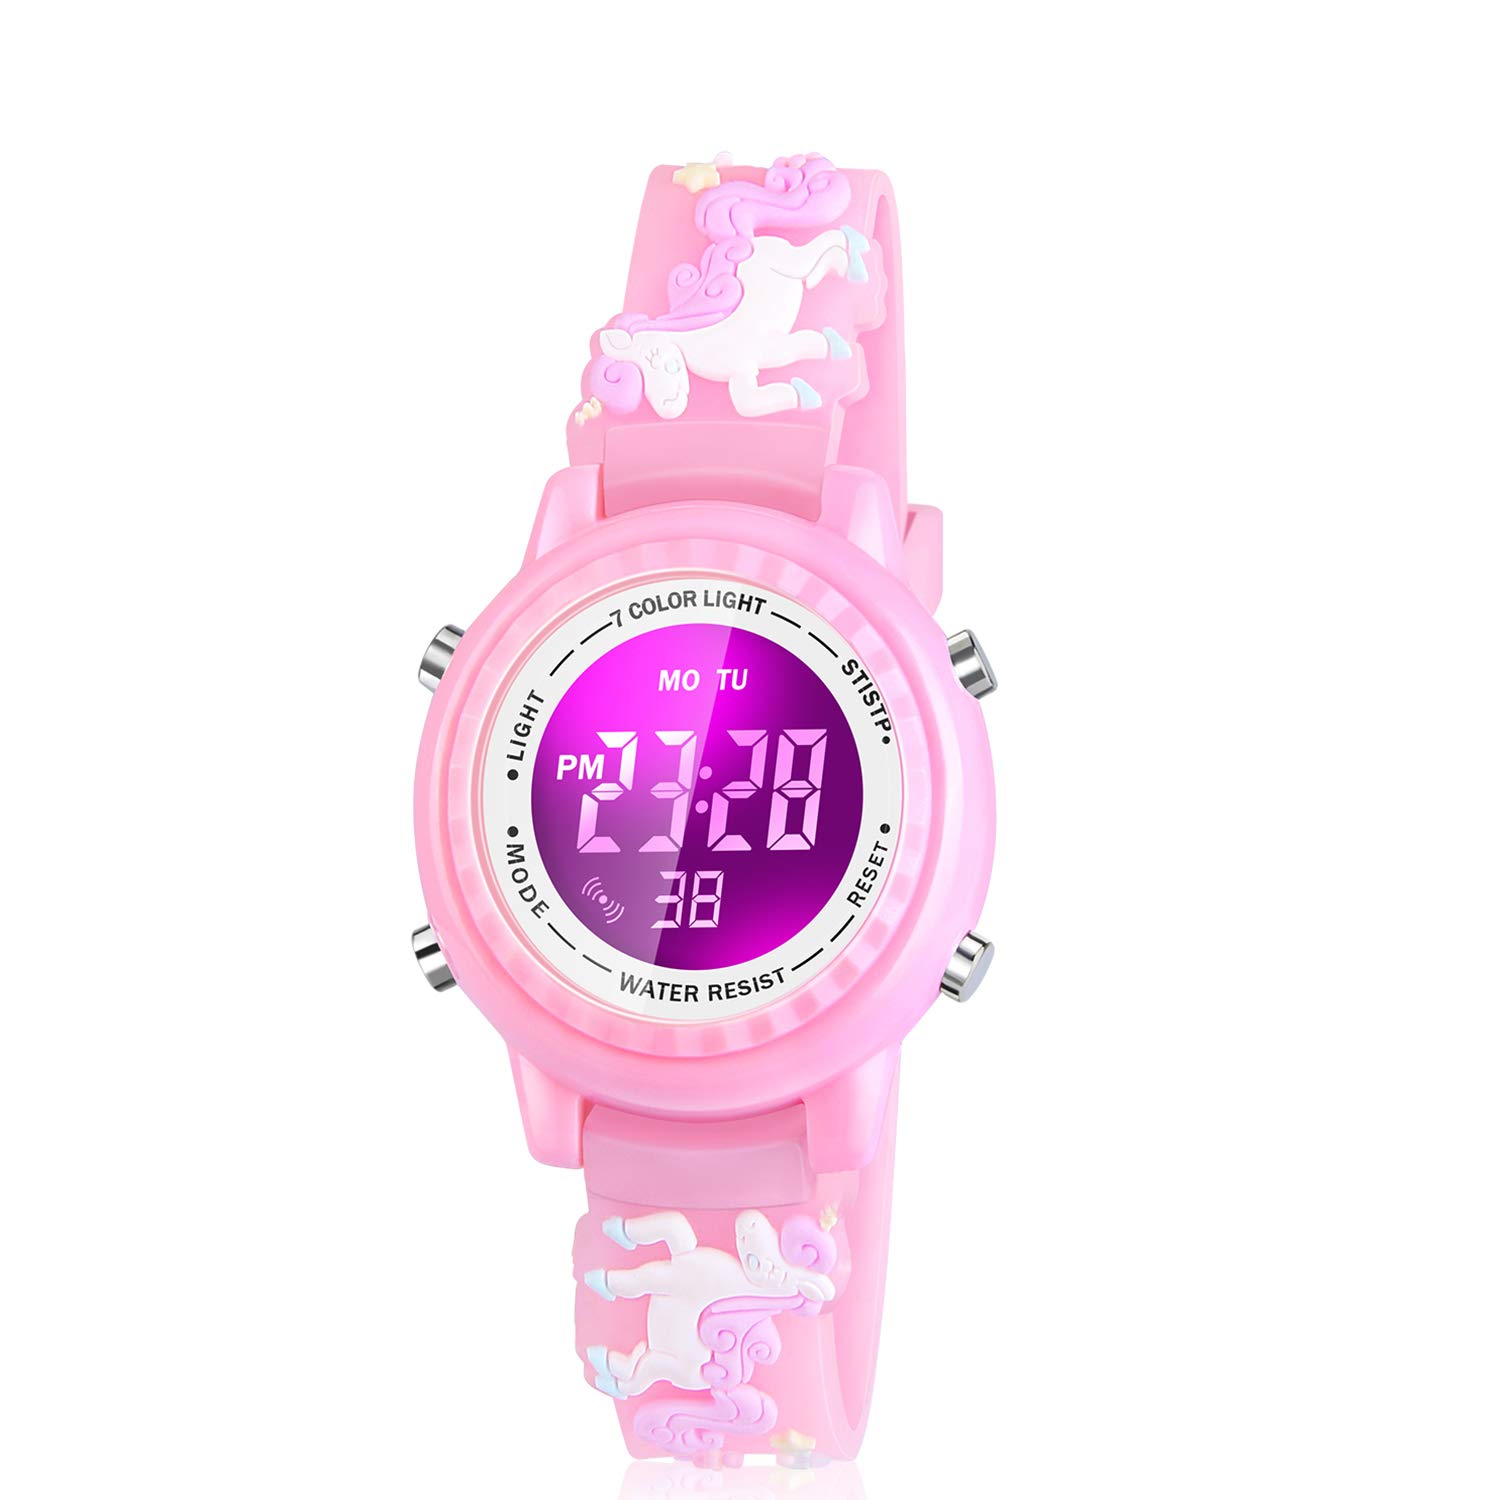 Viposoon Gifts for 5-12 Years Old Girls, Led Digital Watches for Kids Birthday Presents Gifts for 3 4 5 6 7 8 9 10 Year Old Girls Xmas Gifts for 4-...